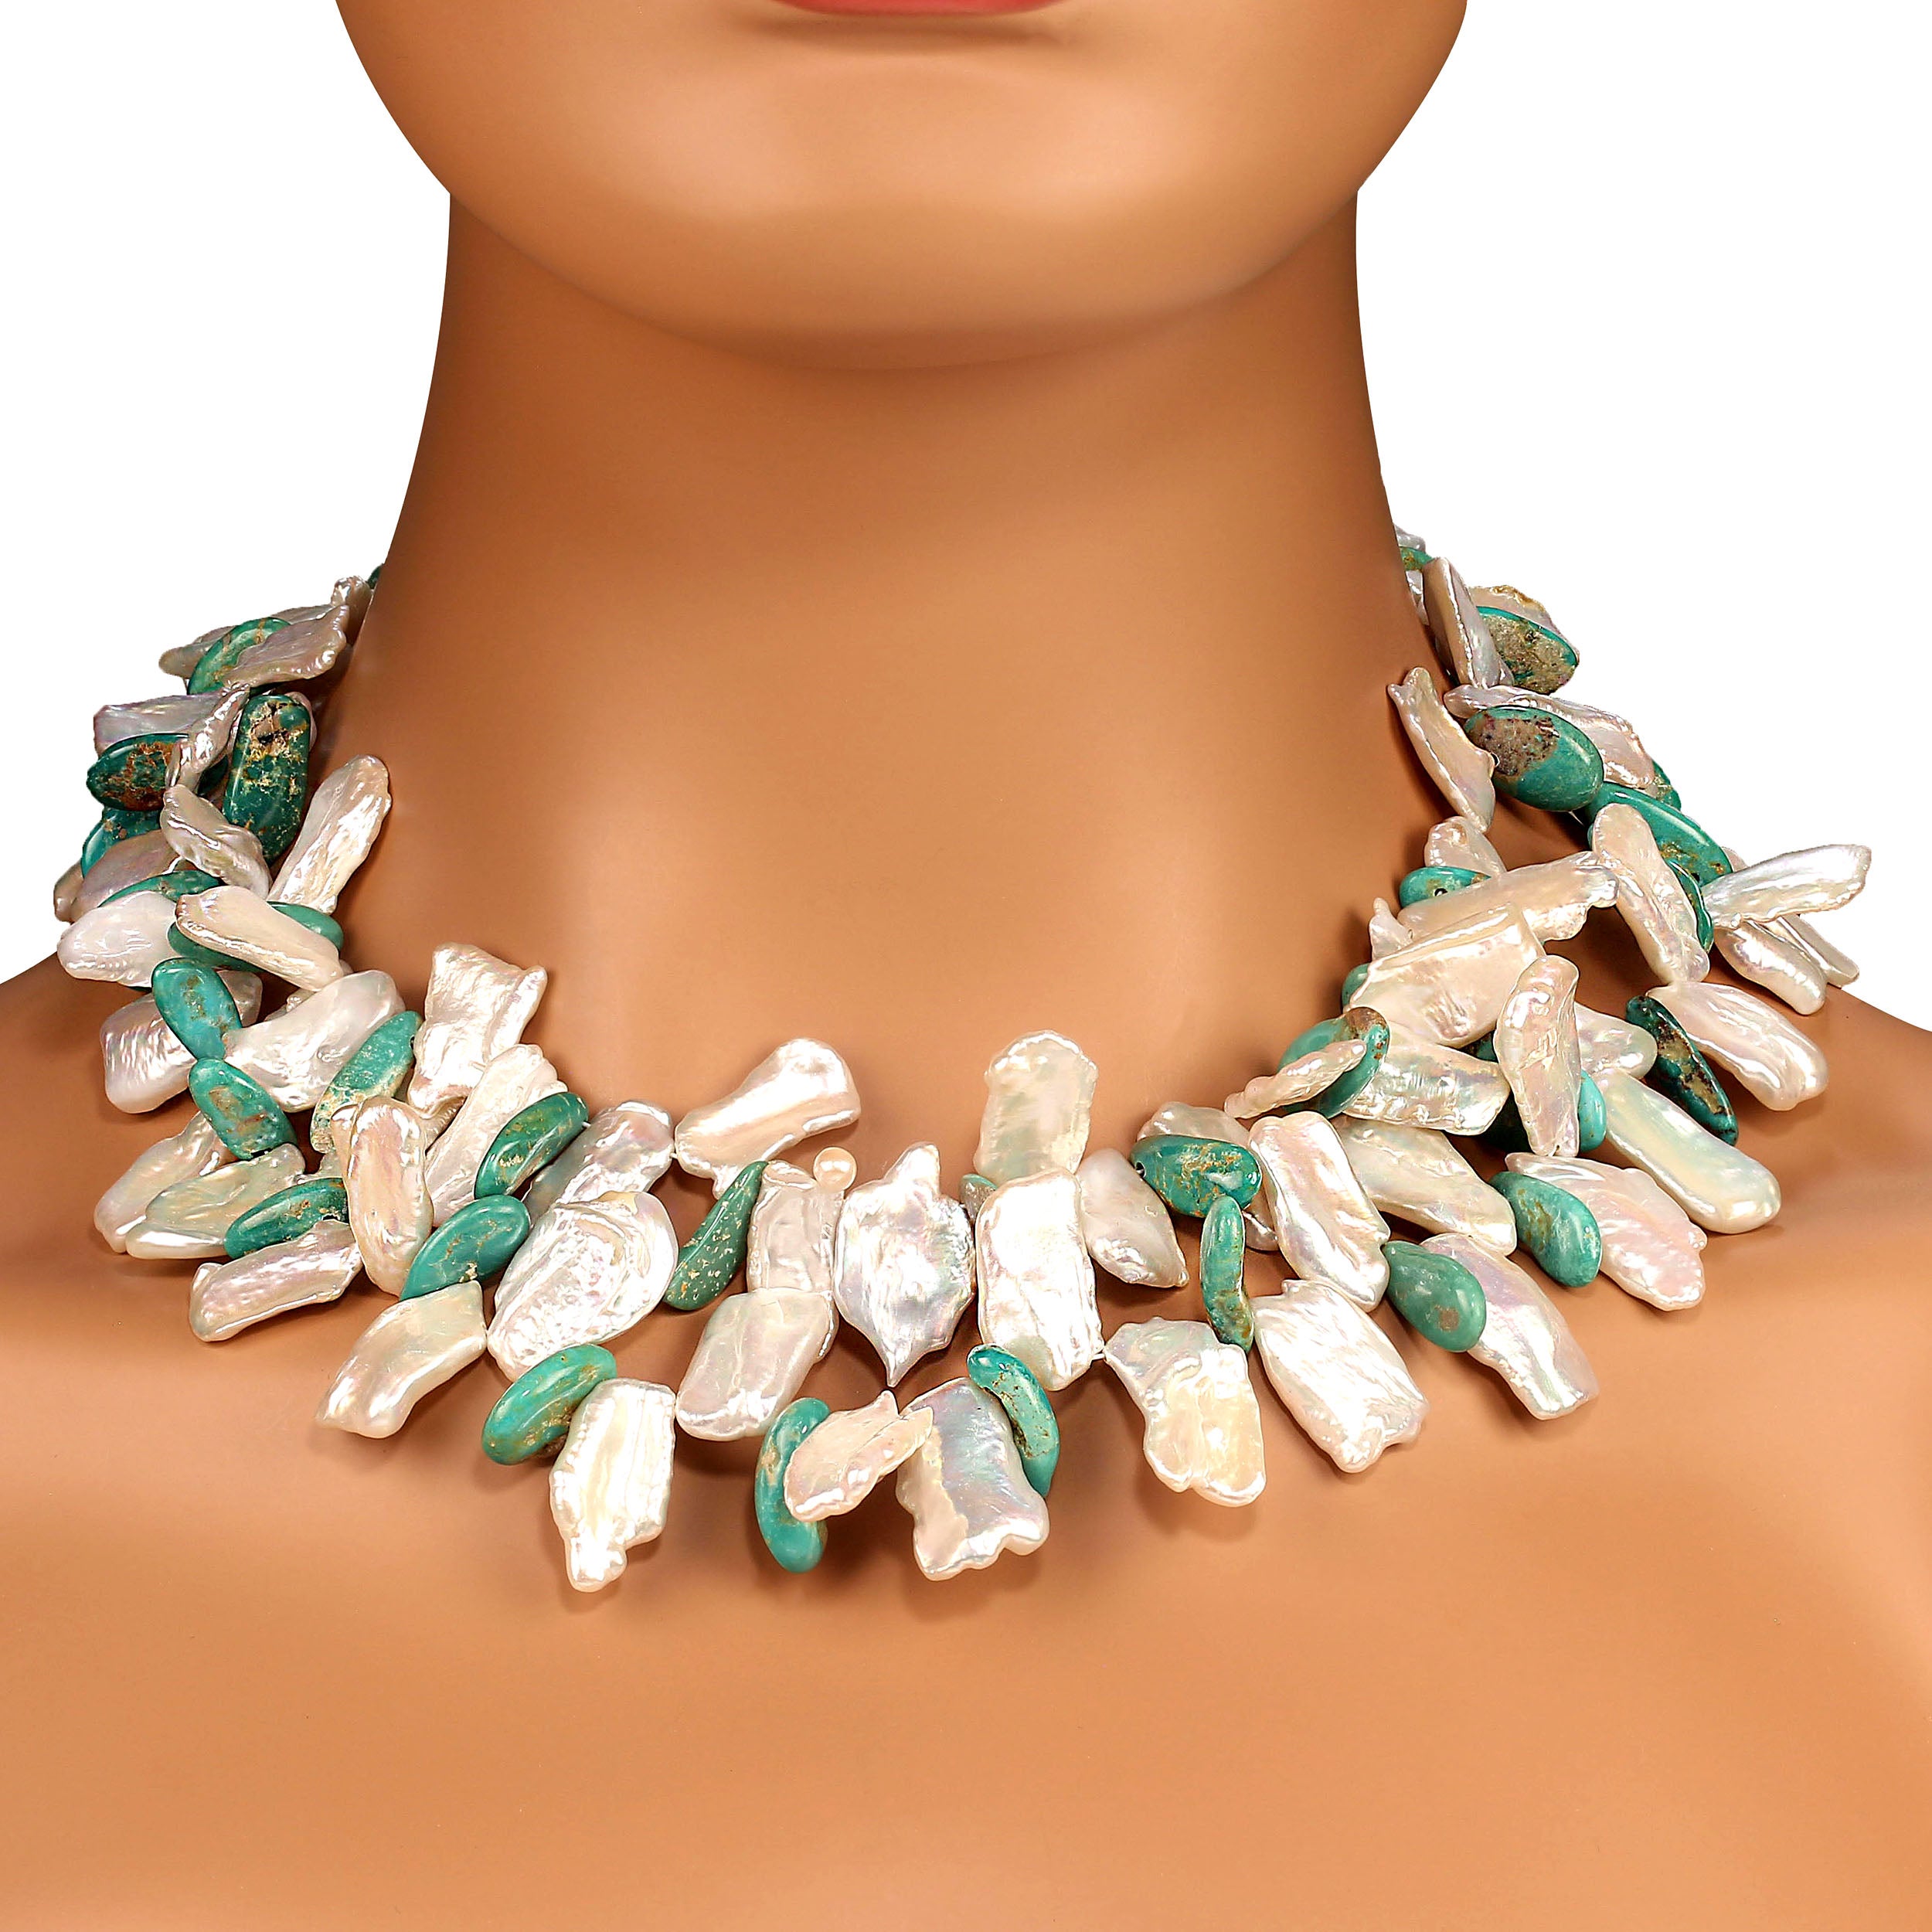 Unique 38-inch necklace of Elisa turquoise dangles and white flat keshi pearls.  These iridescent keshi pearls reflect the light and turquoise color.  The necklace is secured with a detailed pewter toggle clasp.  At 38 inches this necklace can be